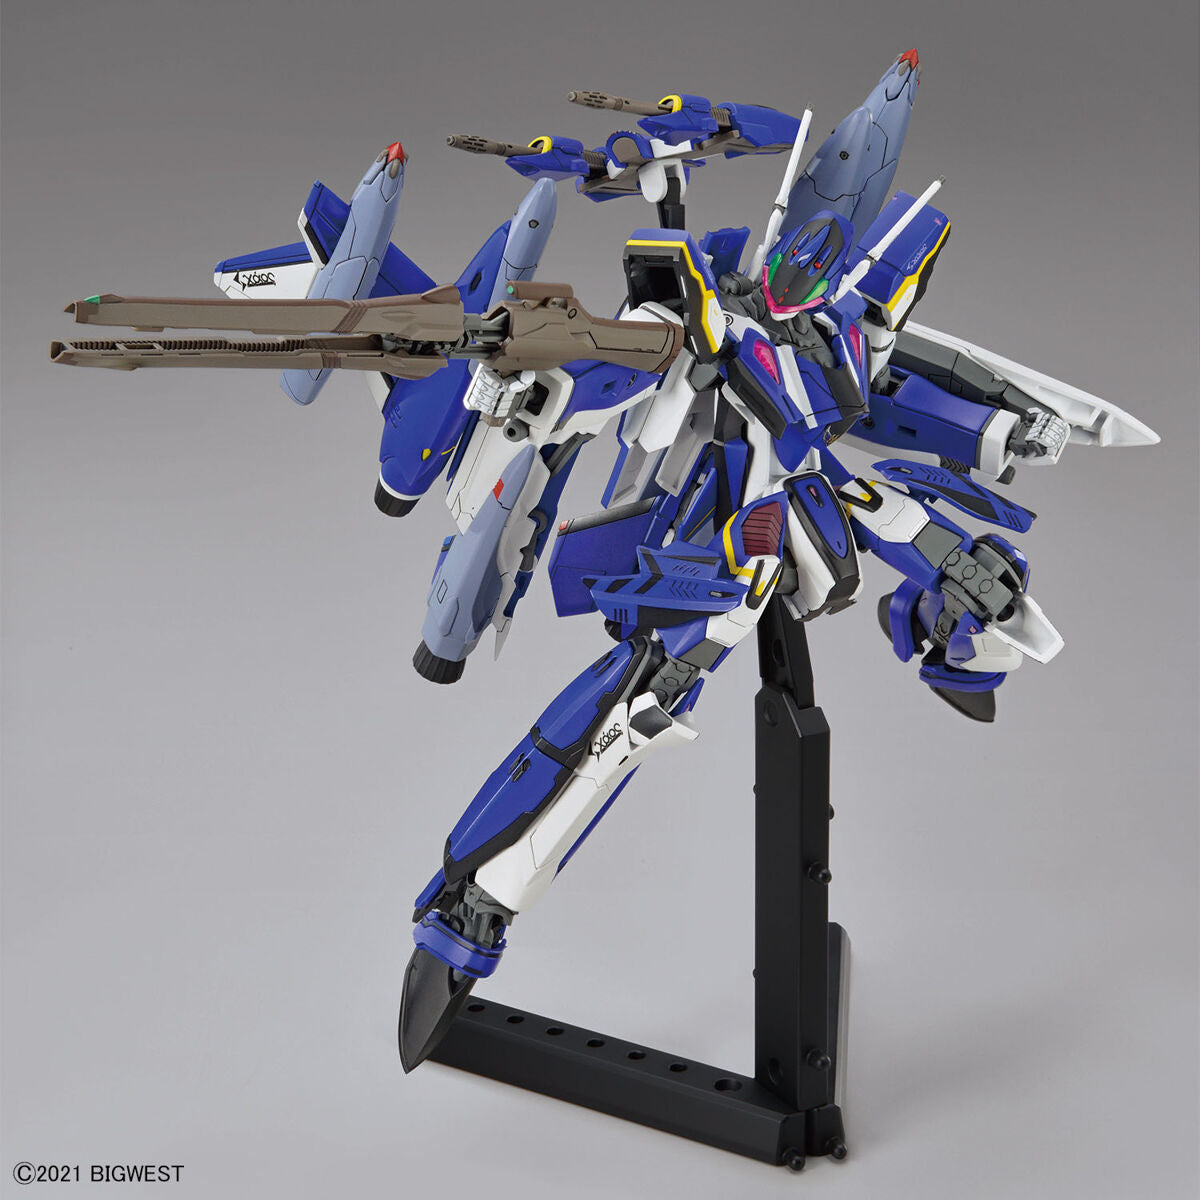 [Online store limited discount for selected models plus decals] Bandai 1/100 HG Macross YF-29 Durandal Valkyrie (Maximilon Genus Machine) assembled model + YF-29 Full Set Pack exclusive decals